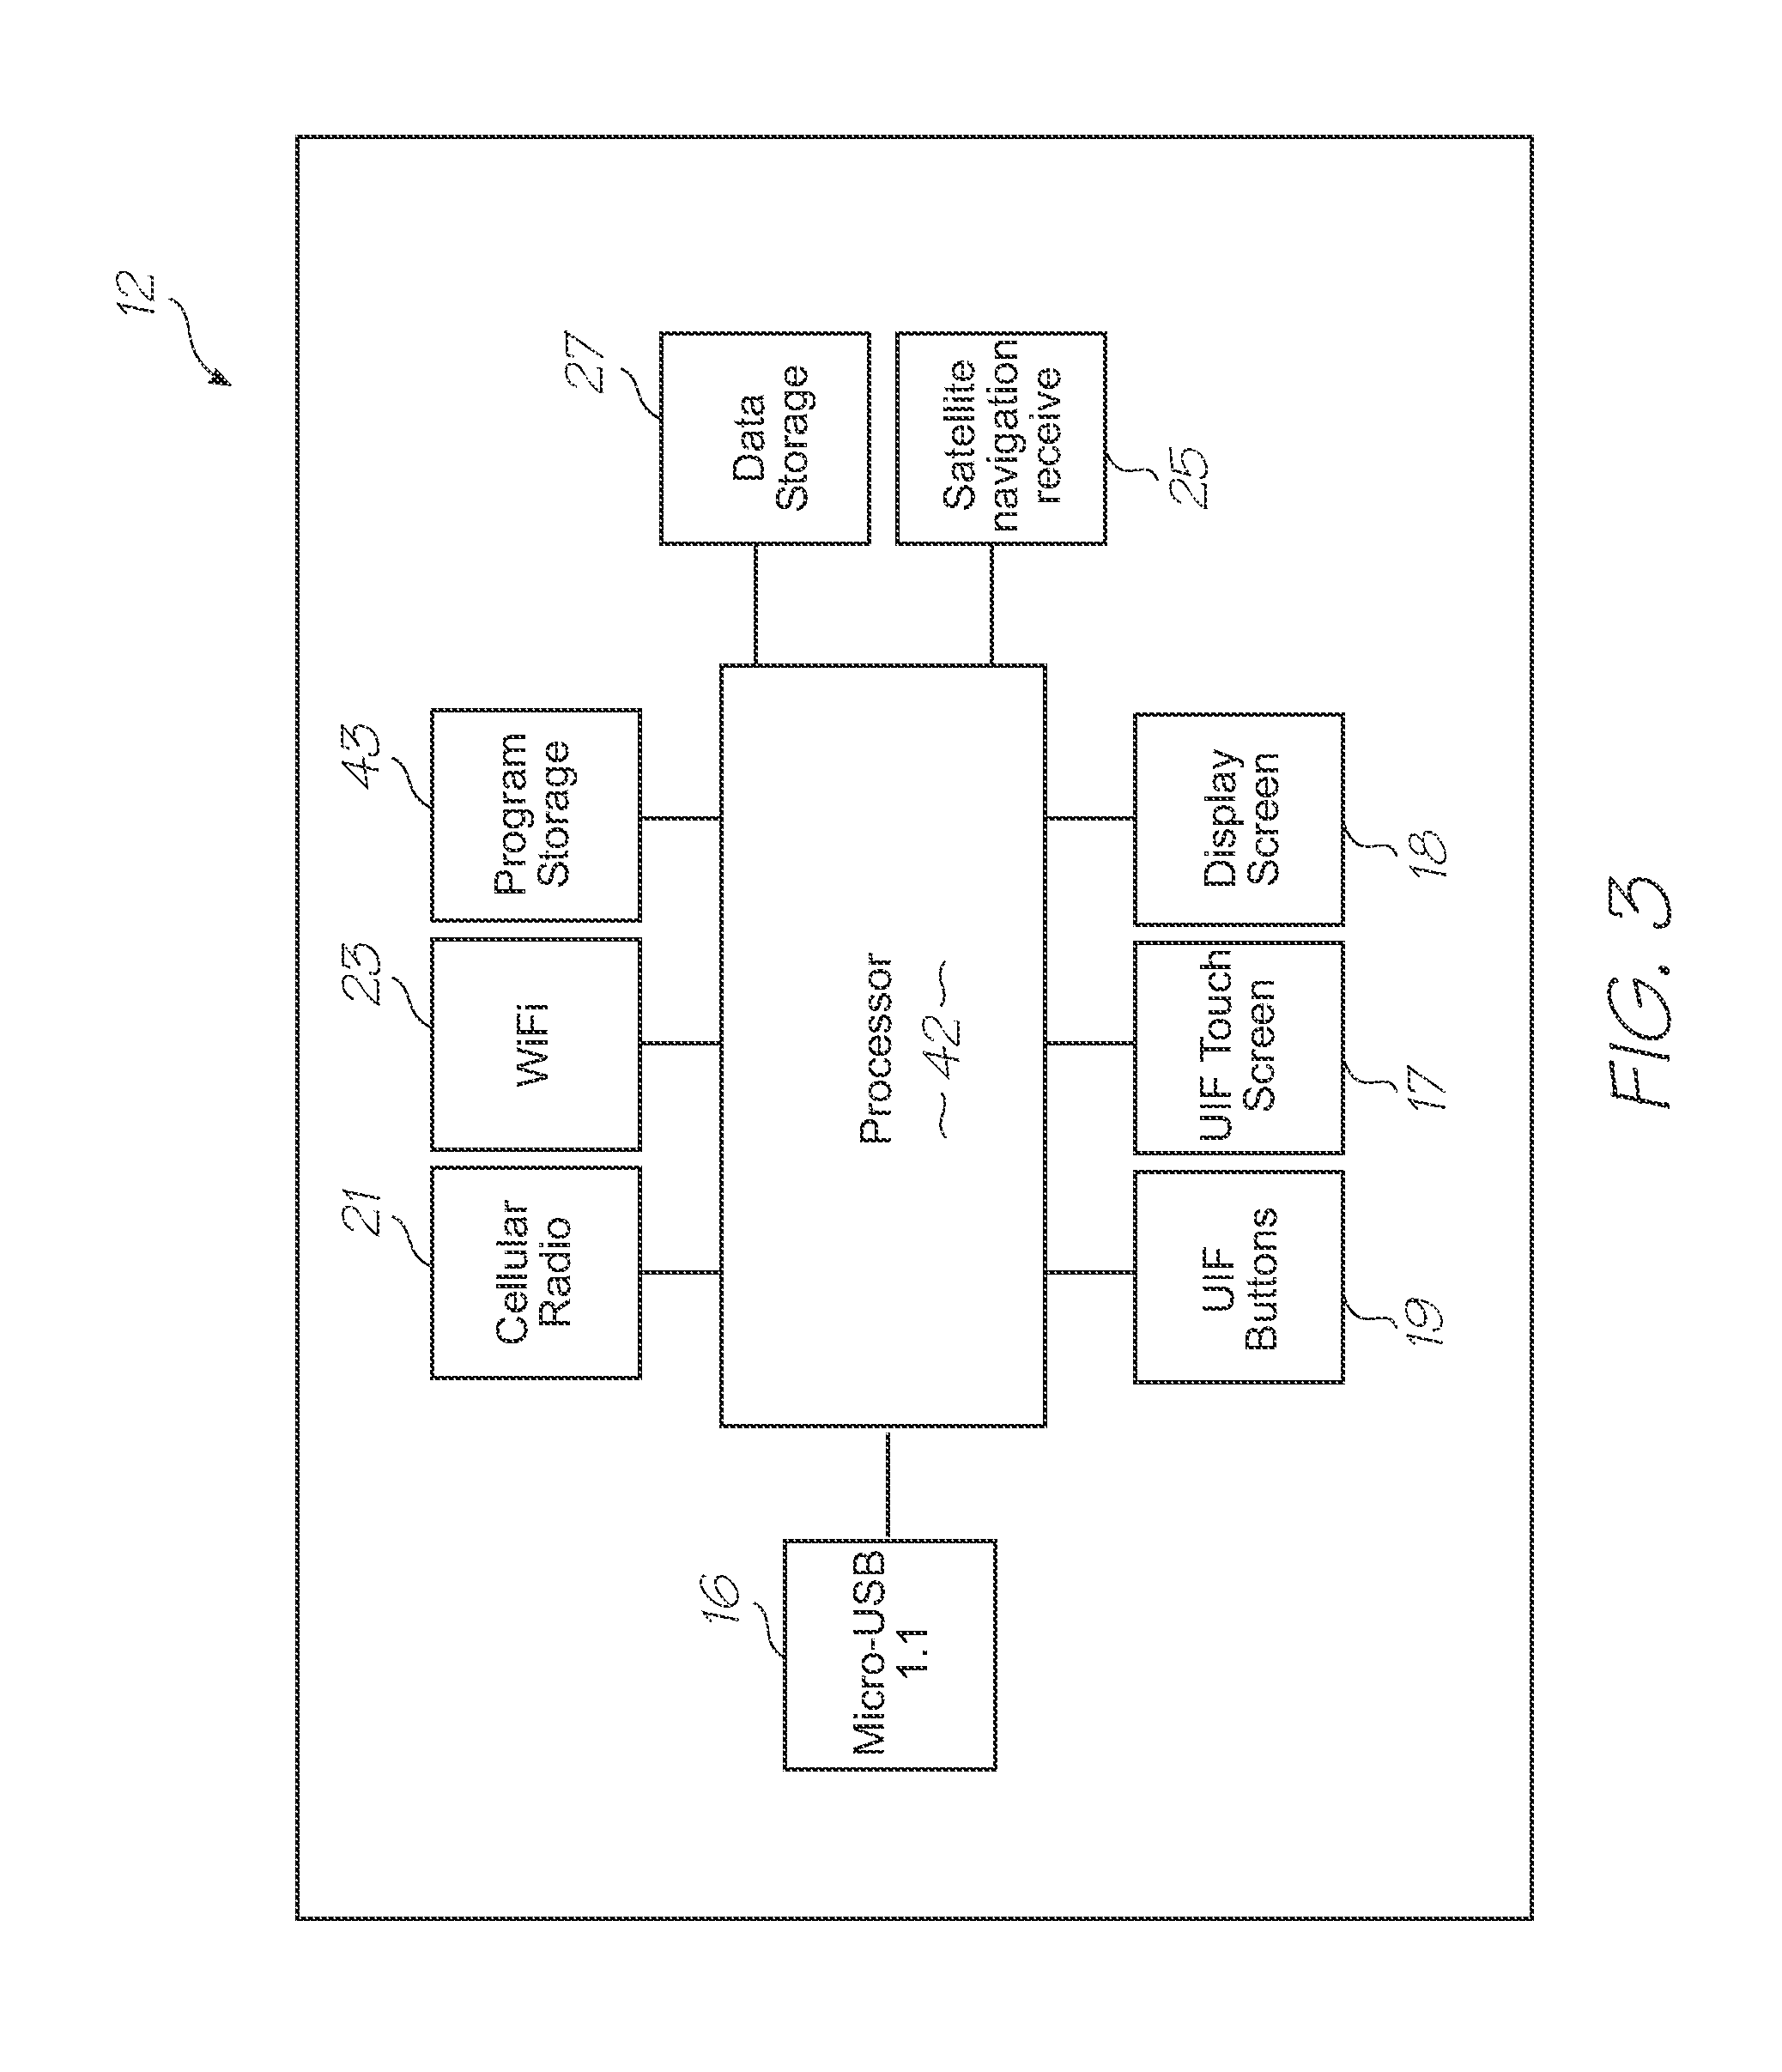 Test module with waste storage incorporating porous element